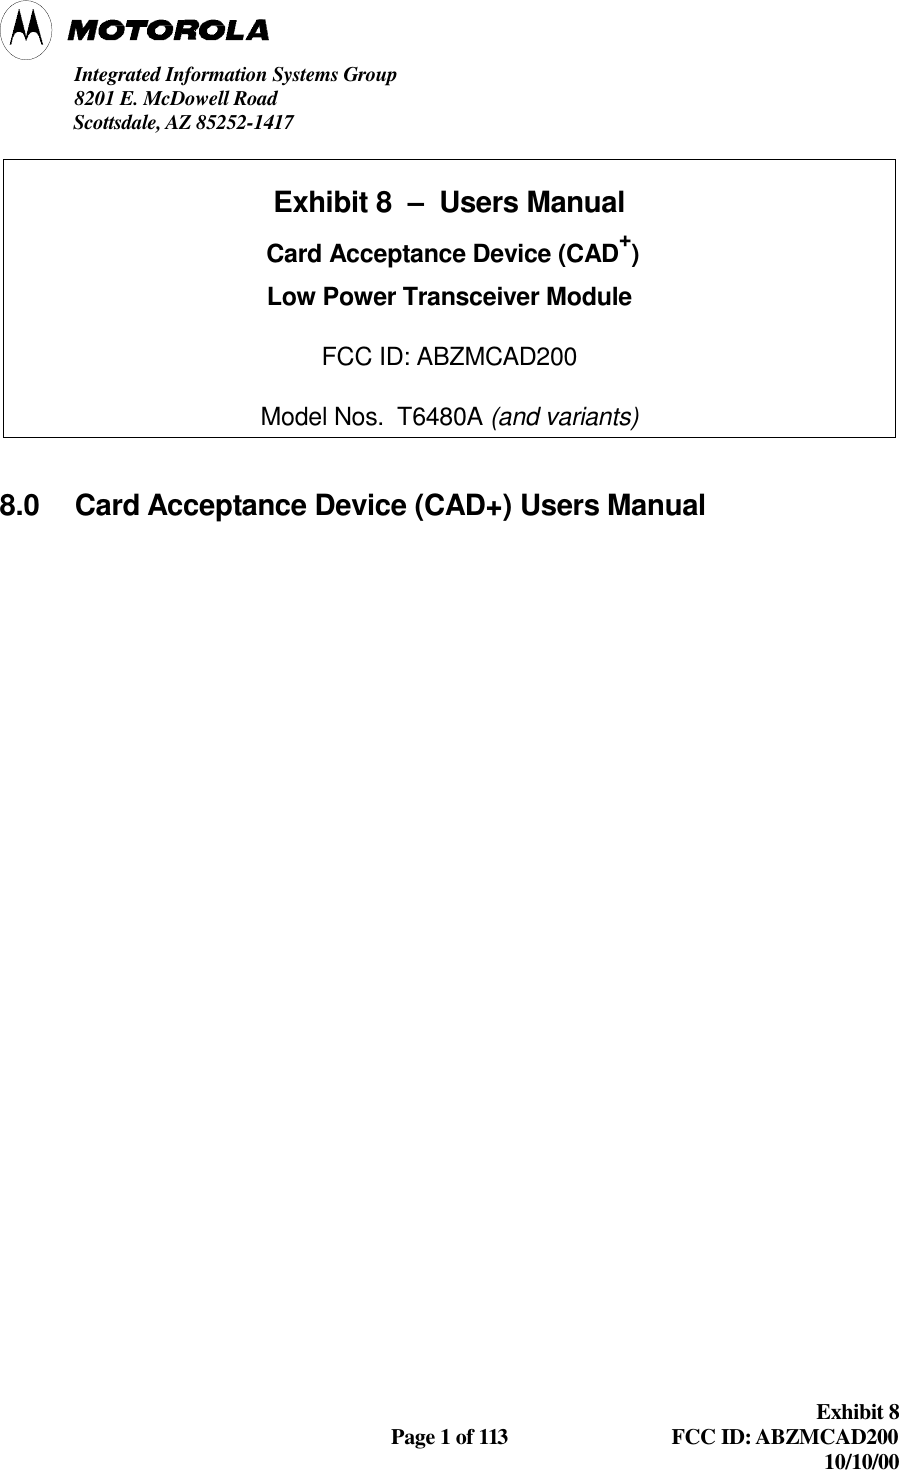 Integrated Information Systems Group8201 E. McDowell Road               Scottsdale, AZ 85252-1417Exhibit 8Page 1 of 113 FCC ID: ABZMCAD20010/10/00Exhibit 8  –  Users Manual Card Acceptance Device (CAD+)Low Power Transceiver ModuleFCC ID: ABZMCAD200Model Nos.  T6480A (and variants)8.0 Card Acceptance Device (CAD+) Users Manual